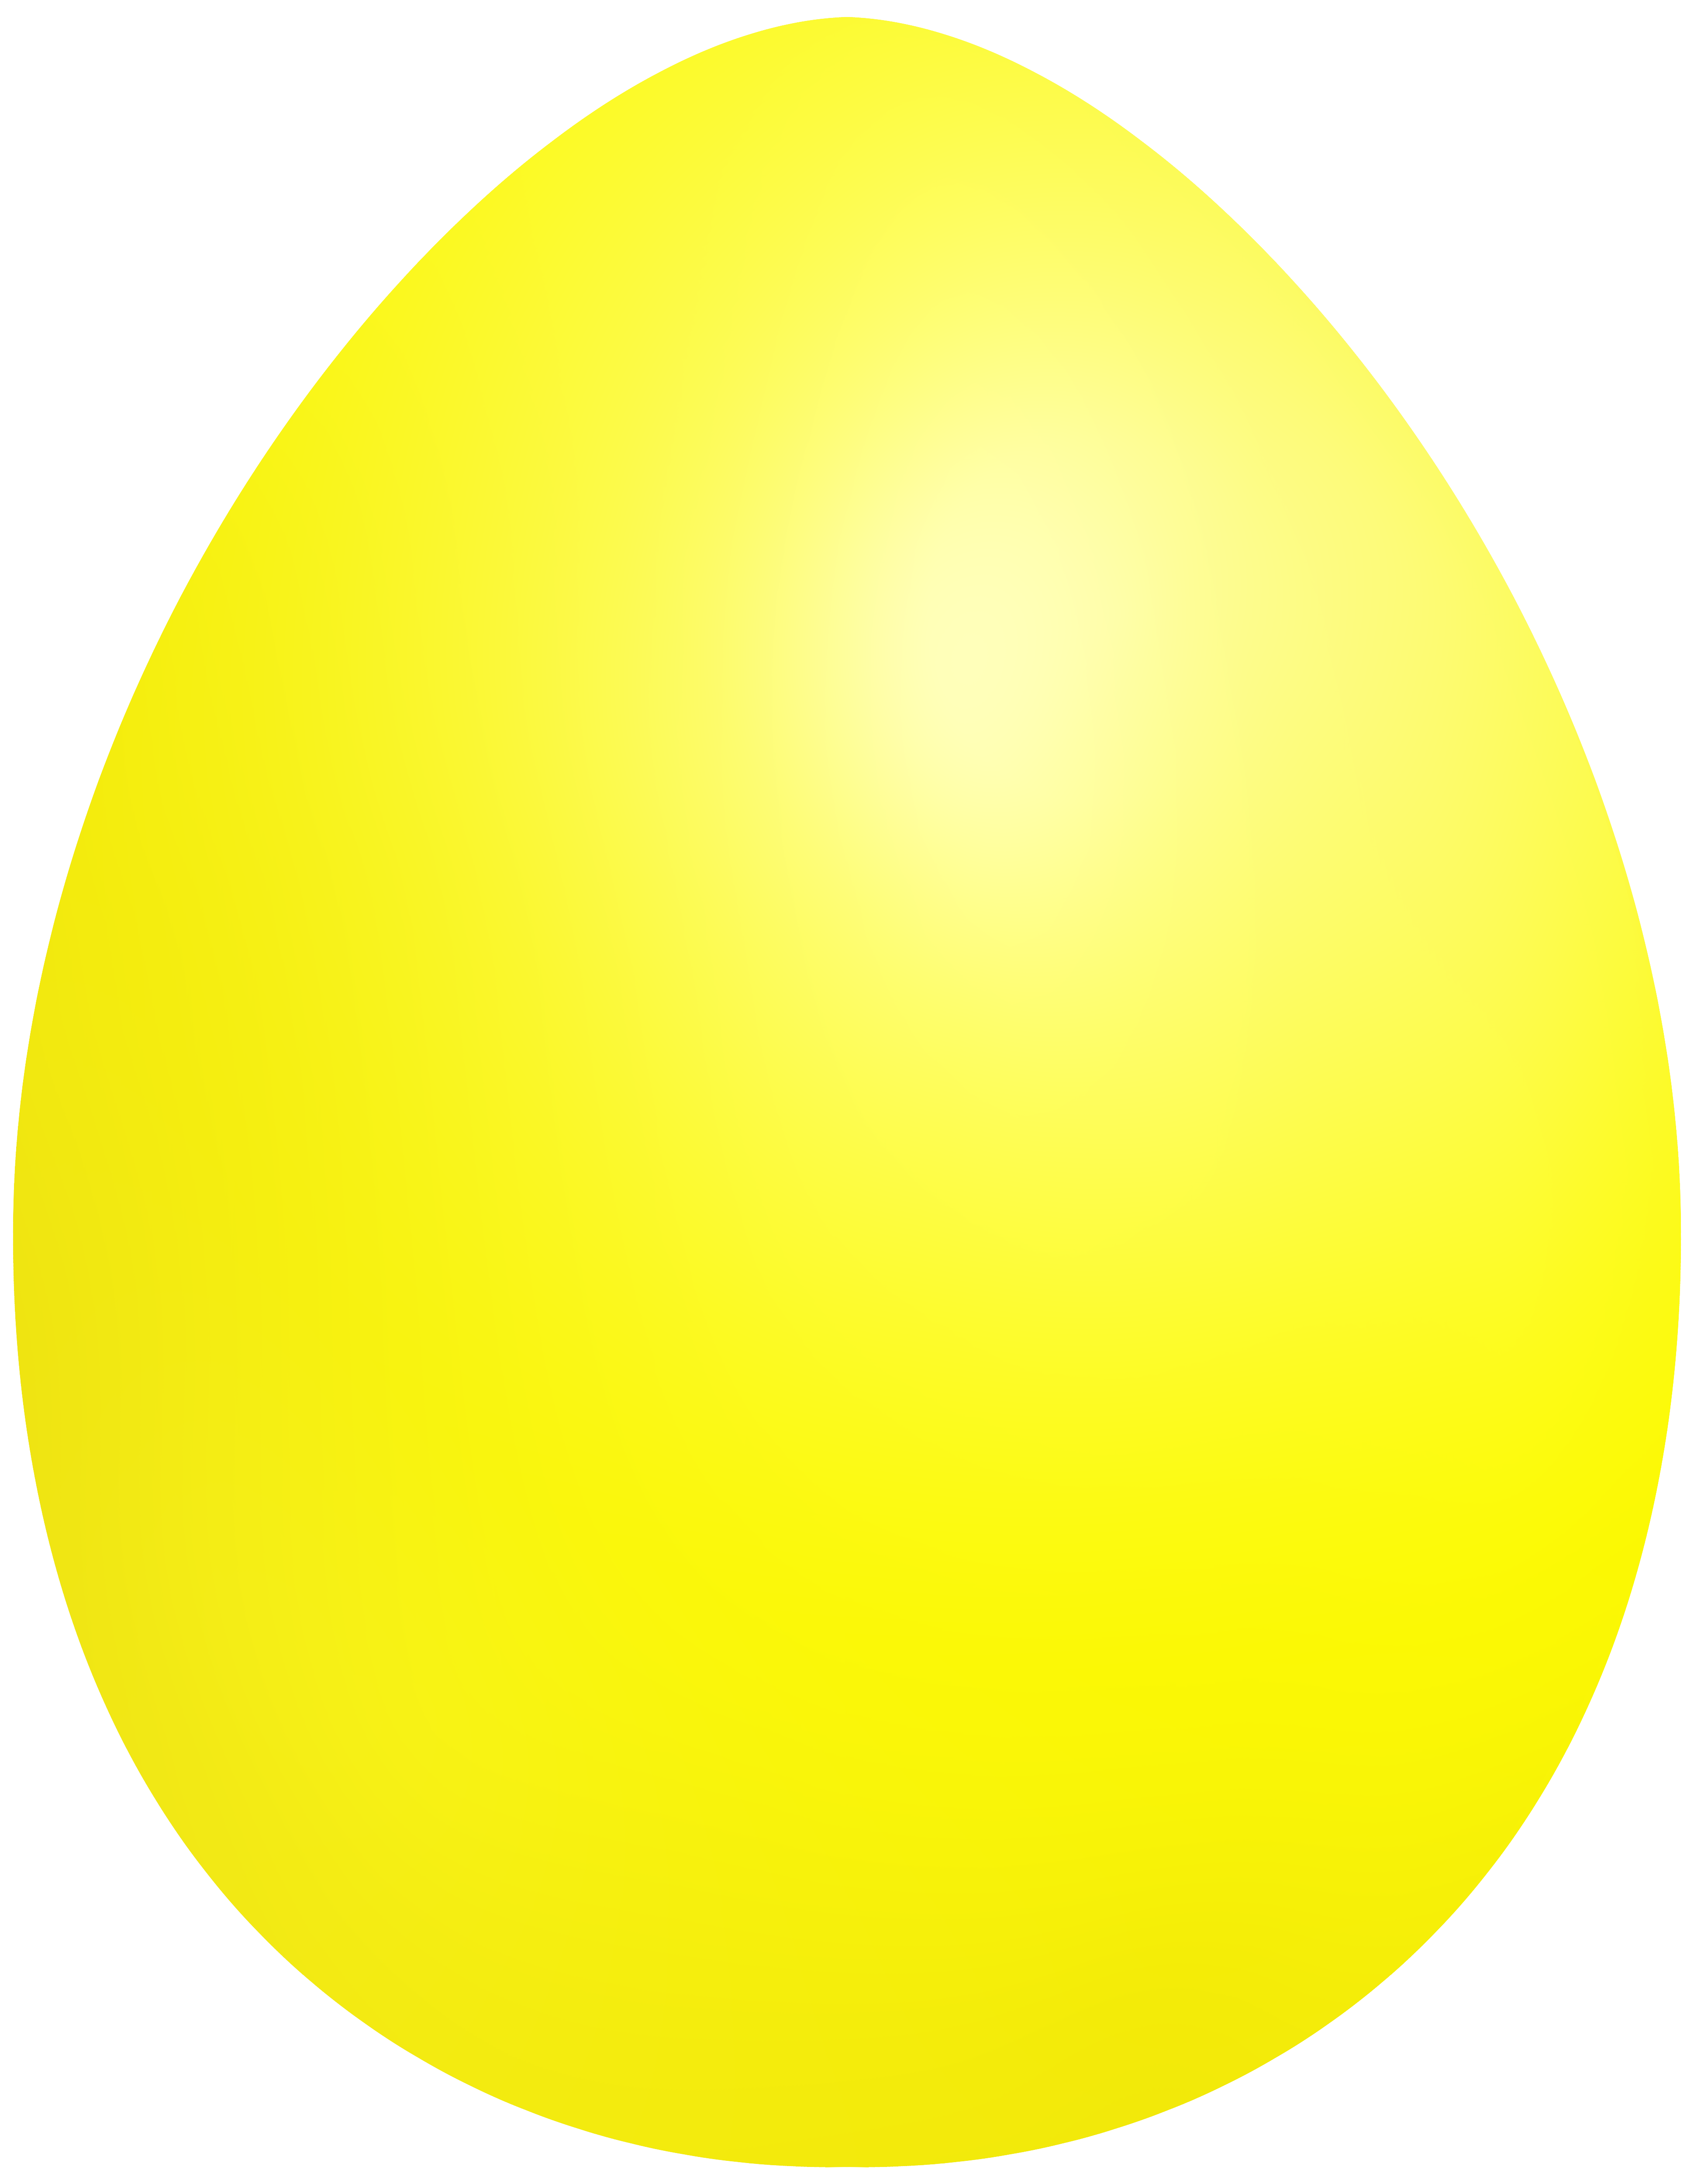 Oval clipart yellow.